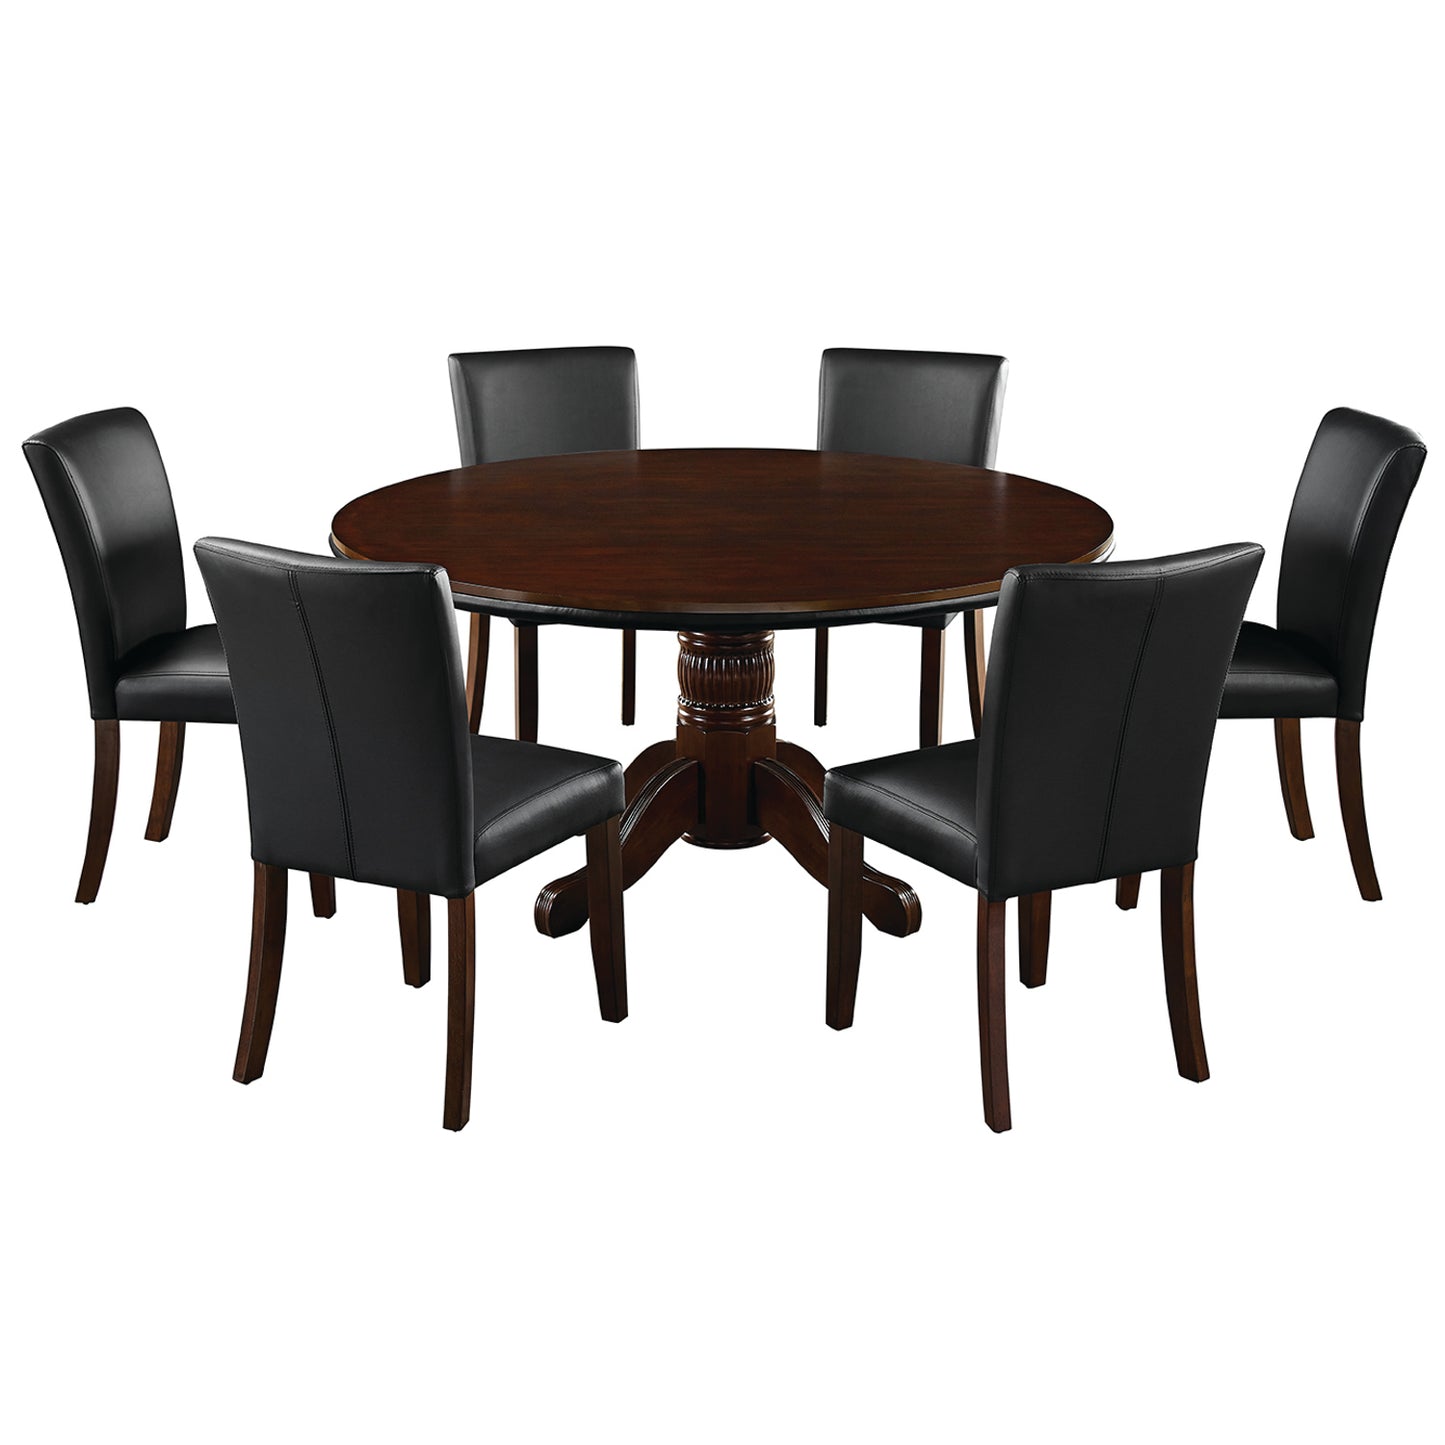 60" 2 in 1 game table with padded vinyl dining chairs in a cappuccino finish